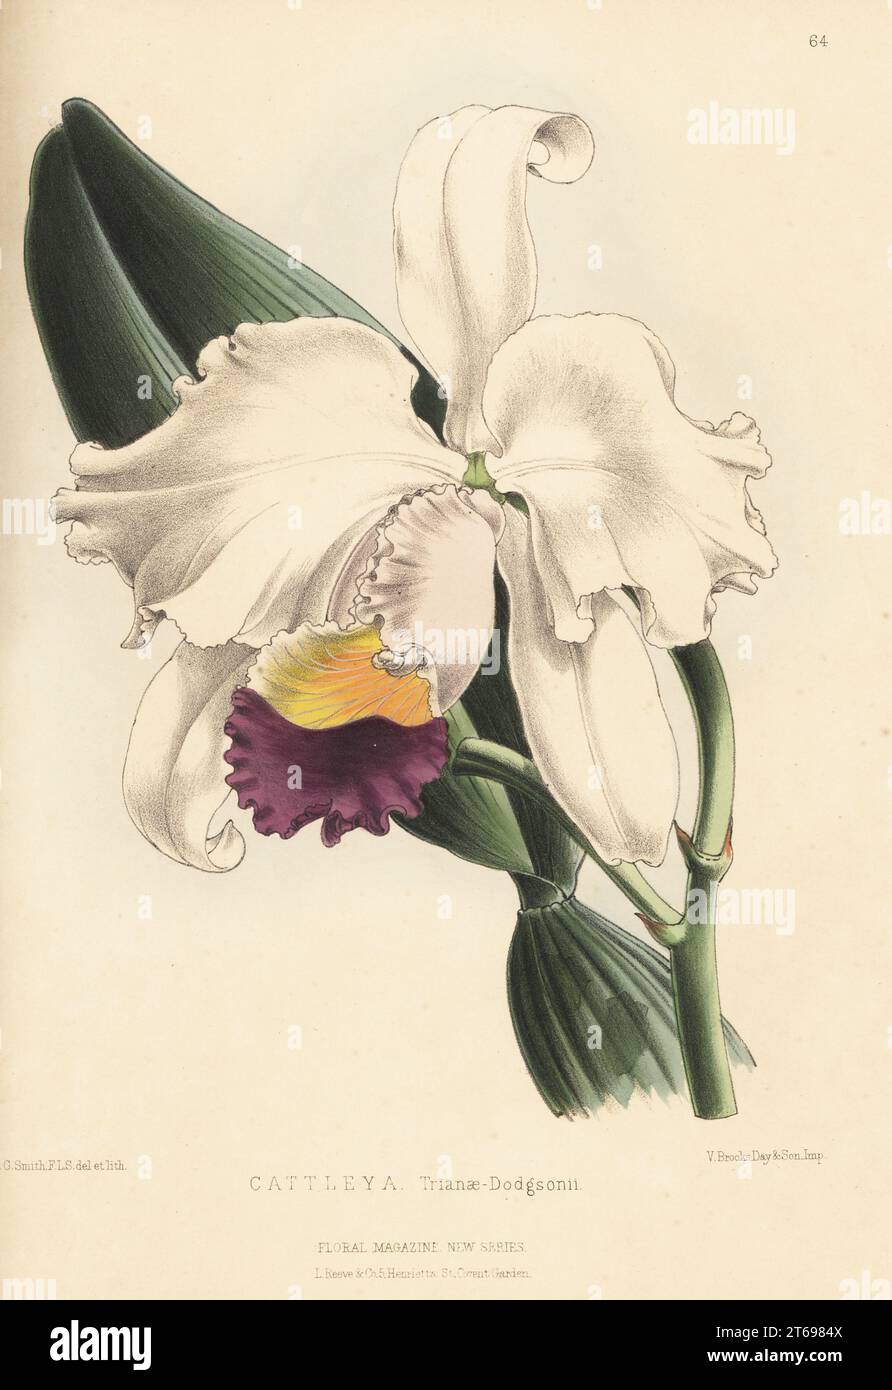 Flor de Mayo or Christmas orchid, Cattleya trianae. Native of New Grenada. As Cattleya Trianae-Dodgsonii, from the collection of R.B. Dodgson of Blackburn. Handcolored botanical illustration drawn and lithographed by Worthington George Smith from Henry Honywood Dombrain's Floral Magazine, New Series, Volume 2, L. Reeve, London, 1873. Lithograph printed by Vincent Brooks, Day & Son. Stock Photo